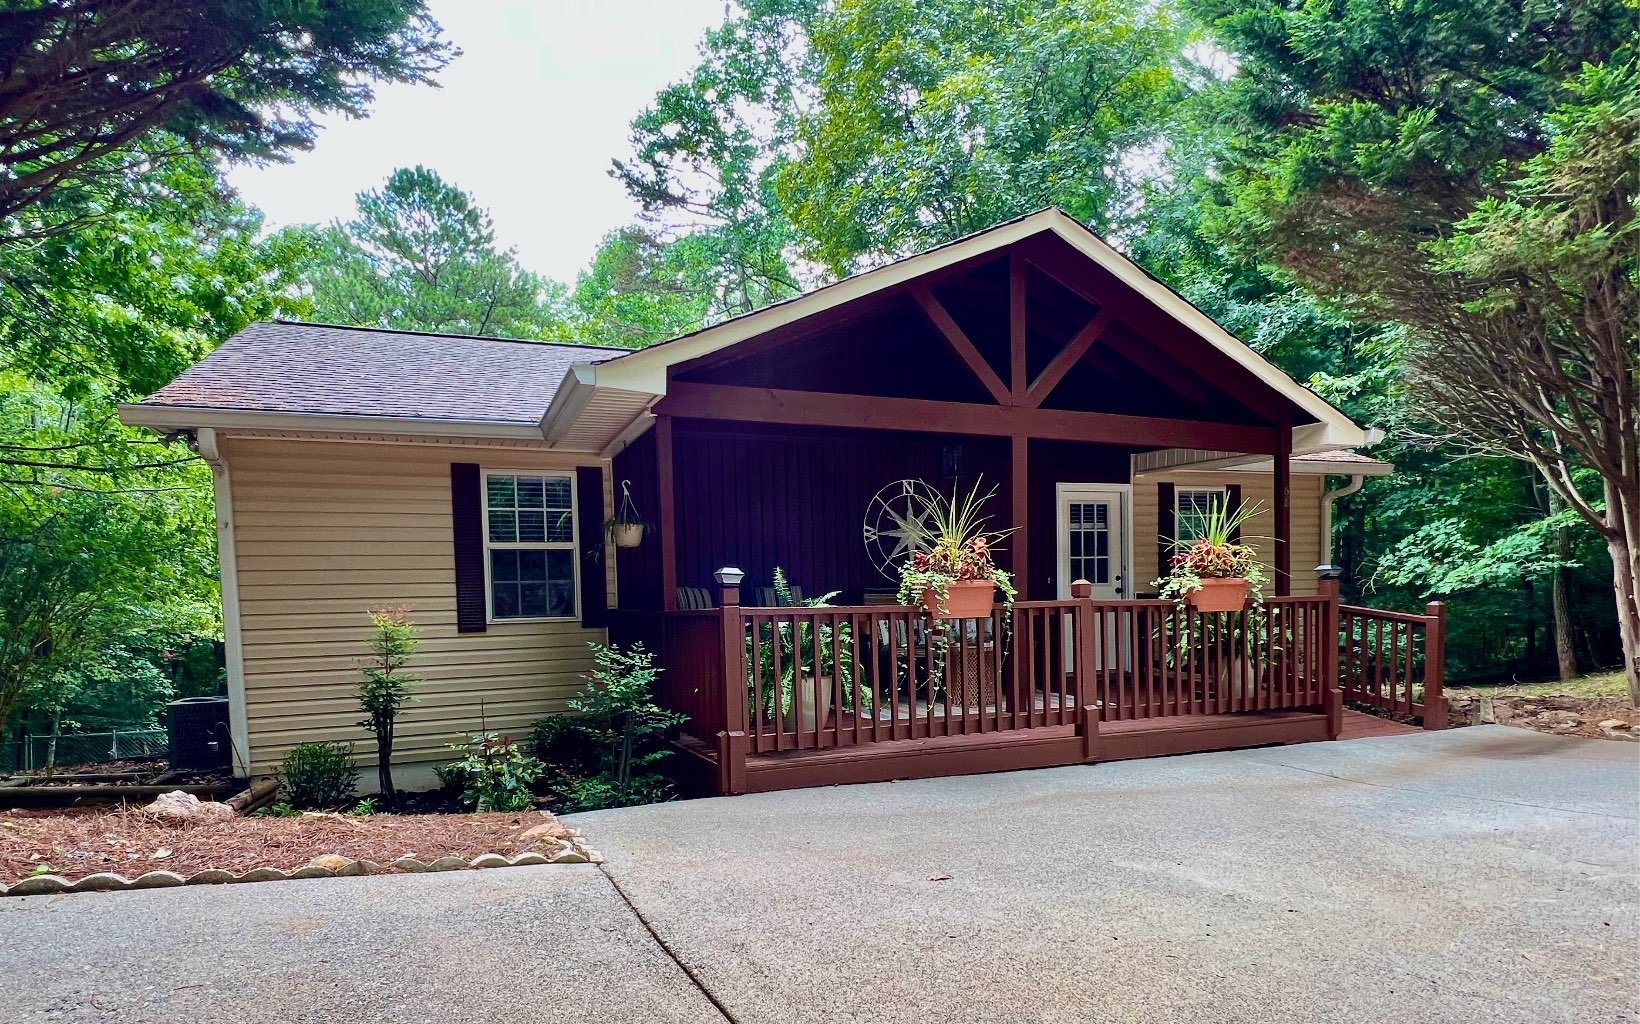 NEWLY RENOVATED RANCH CABIN only minutes from Downtown Ellijay! This beautifully renovated home has two beds and two full baths on the main with refinished pine floors, new stainless appliances, granite countertops, vaulted ceilings, and a gorgeous corner gas log fireplace. Open concept from kitchen and dining into living space. Ramp entry and everything (including laundry) on main level for easy one-level living. All paved circular drive with a side strip of additional parking. Back deck is perfect for grilling, with an additional screened porch attached. New 3 ton HVAC. The vaulted open and inviting front porch is a great place to relax and enjoy the wildlife in this calm, peaceful resort. A 3rd bedroom with wardrobe and full bath are in the finished basement, with a flex room that could be a 4th bedroom or living area. Walk out on to the patio from the basement, a perfect spot for a hot tub, and you'll find a gorgeous fenced in back yard with fire pit area, storage building, and small creek in the back! Second half of basement would be a perfect game room, workshop, or additional bedrooms. So many possibilities with this adorable rustic retreat! Enjoy all the amenities of Coosawattee, including three pools, rec center with arcade, fitness room, tennis, basketball, pickleball, and more. Hiking trails, stocked pond and river access for fishing and swimming add to the enjoyment for families and renters alike.